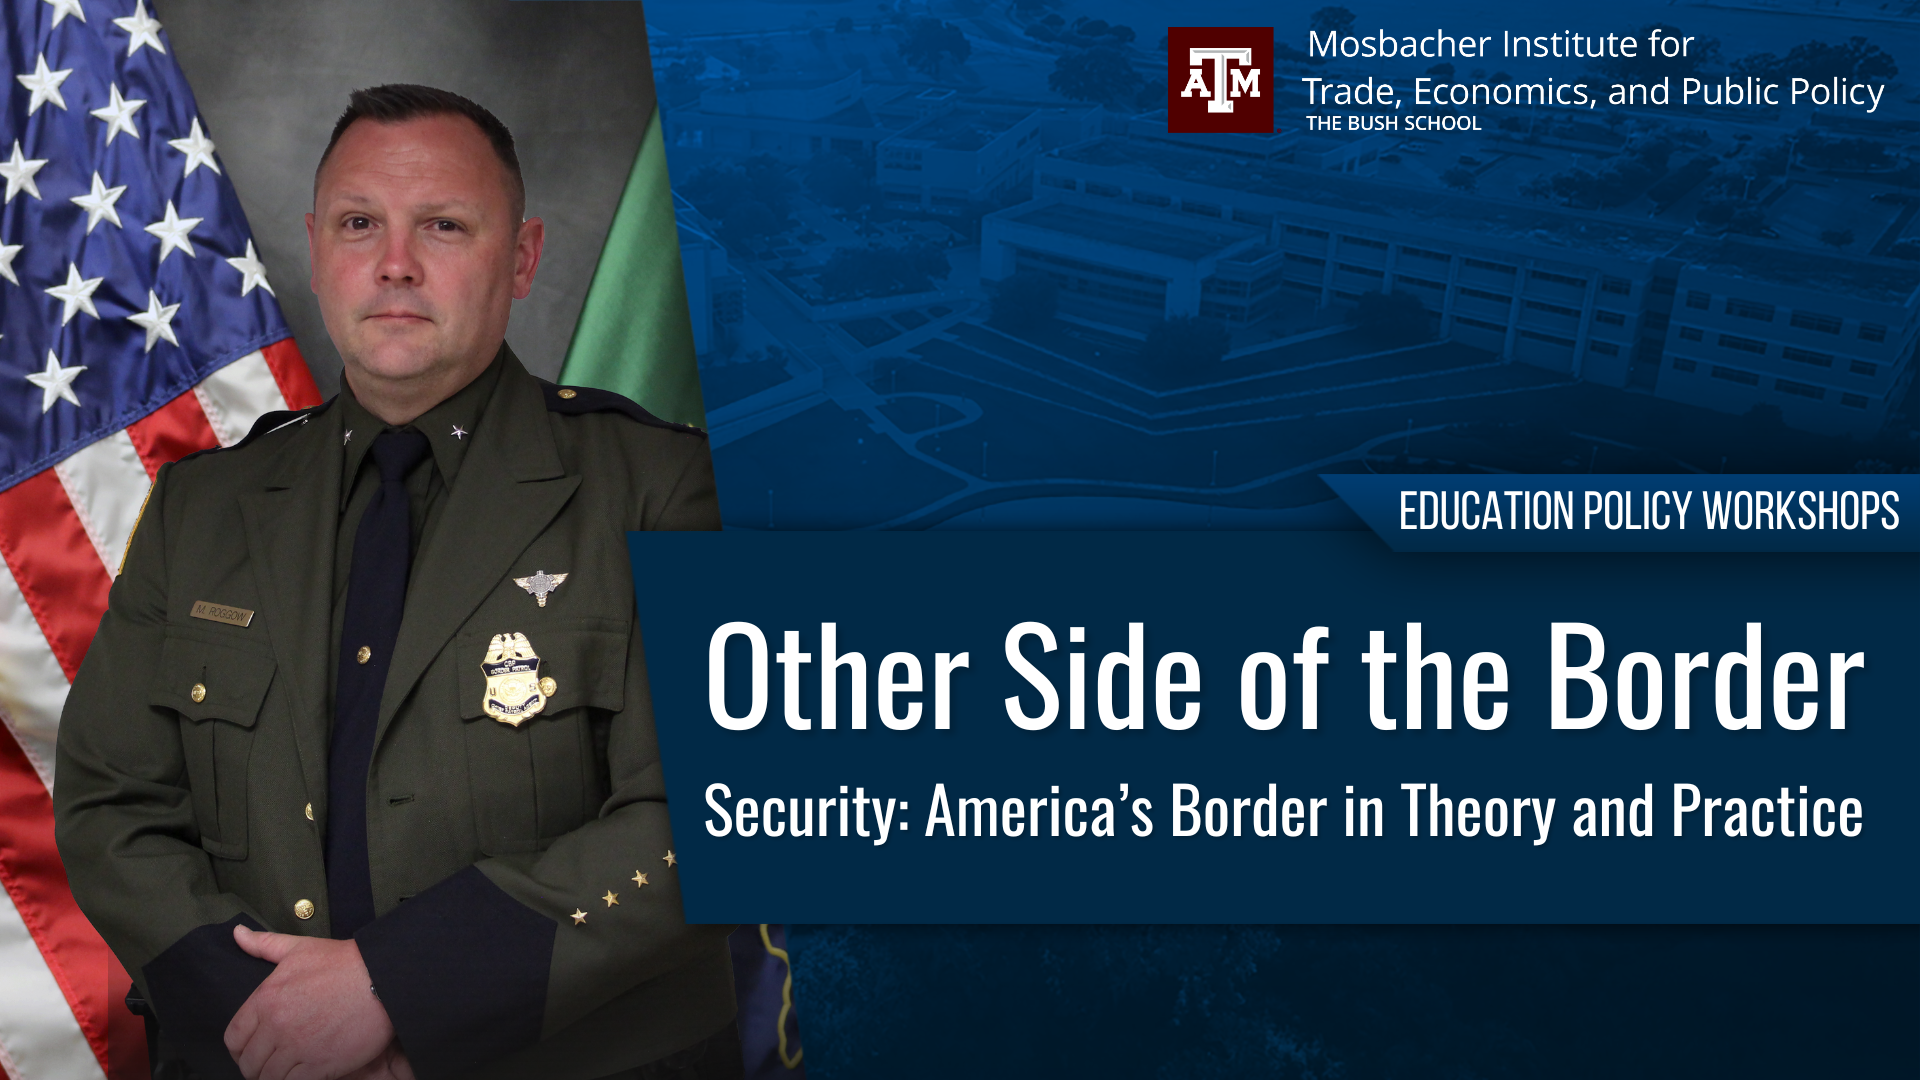 Other Side of the Border Program talks about Border Security and Increasing Border Community Liaison Efforts.